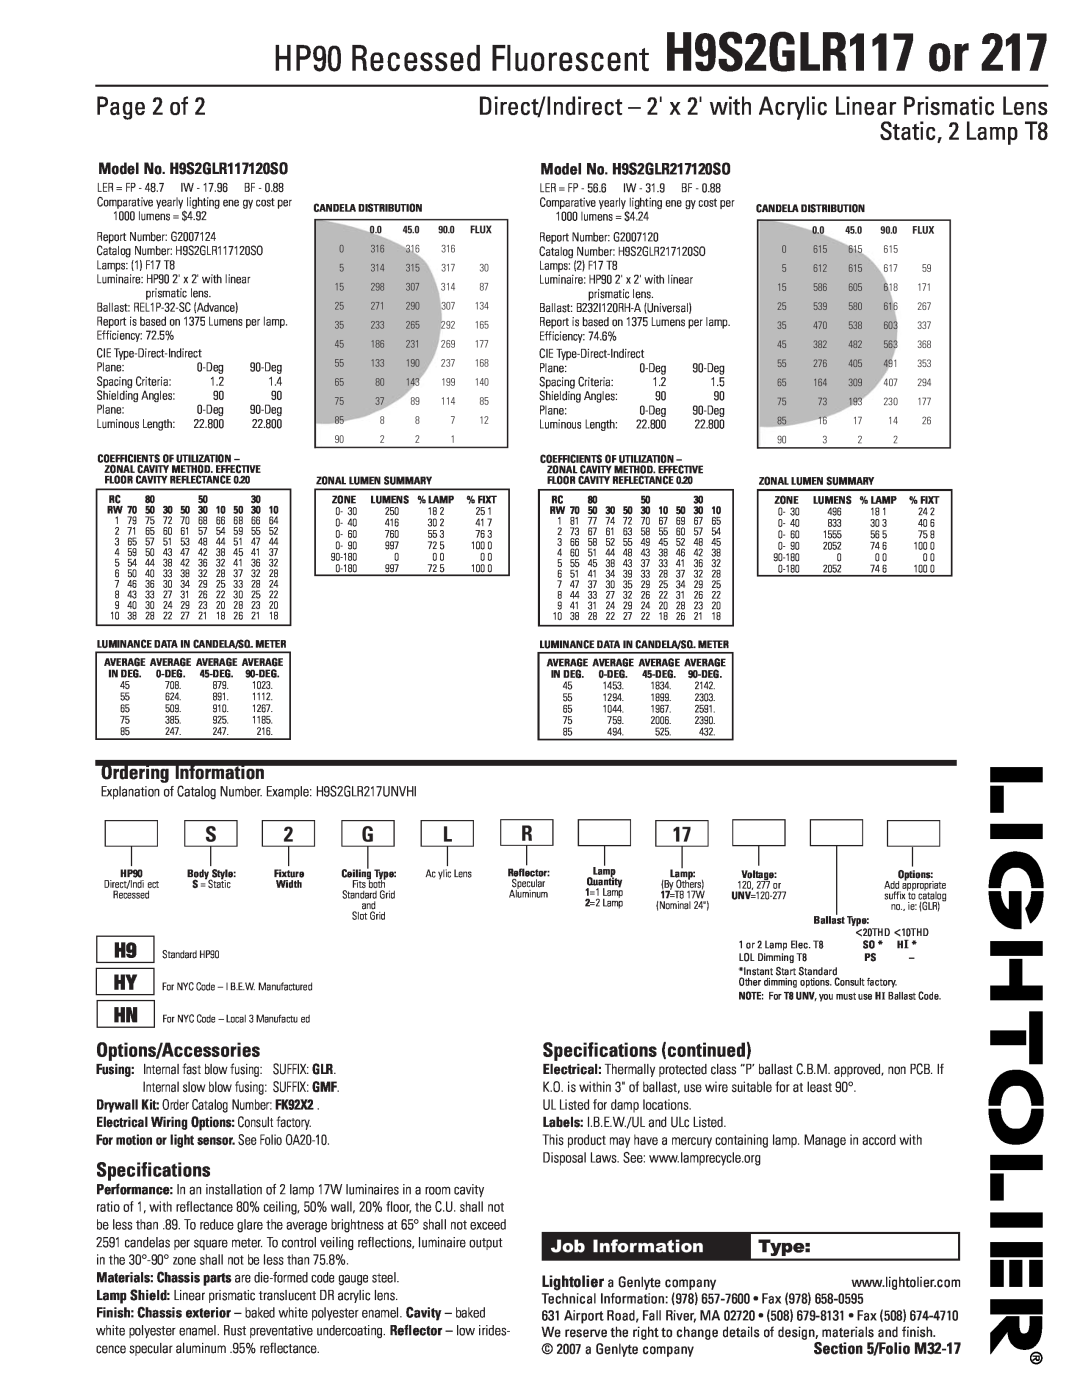 Lightolier H9S2GLR217 Page 2 of, Ordering Information, Options/Accessories, Specifications continued, Job Information 